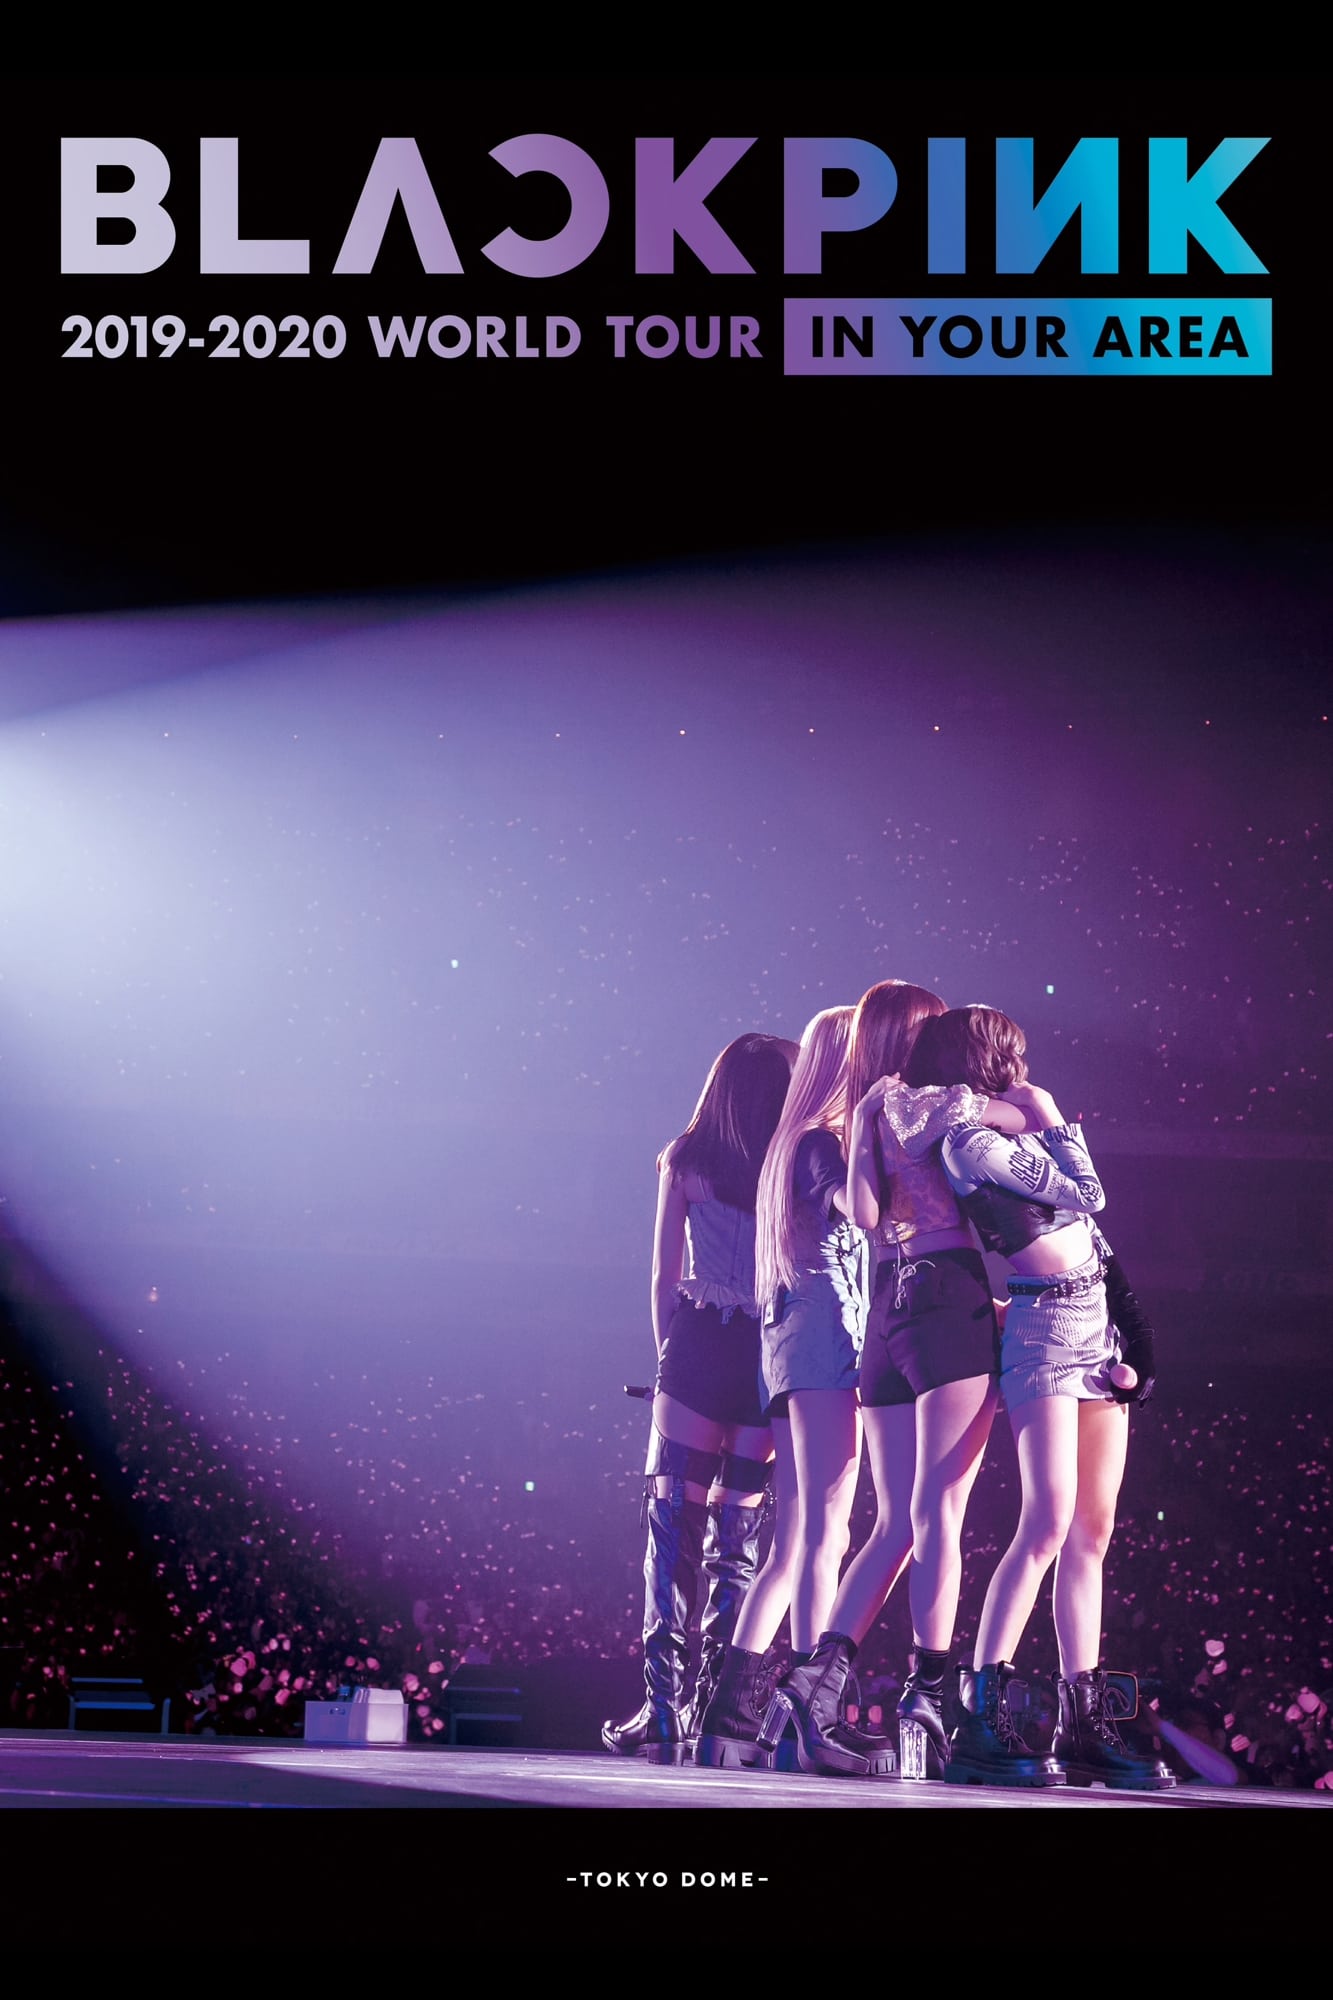 BLACKPINK 2019-2020 WORLD TOUR IN YOUR AREA 东京巨蛋演唱会